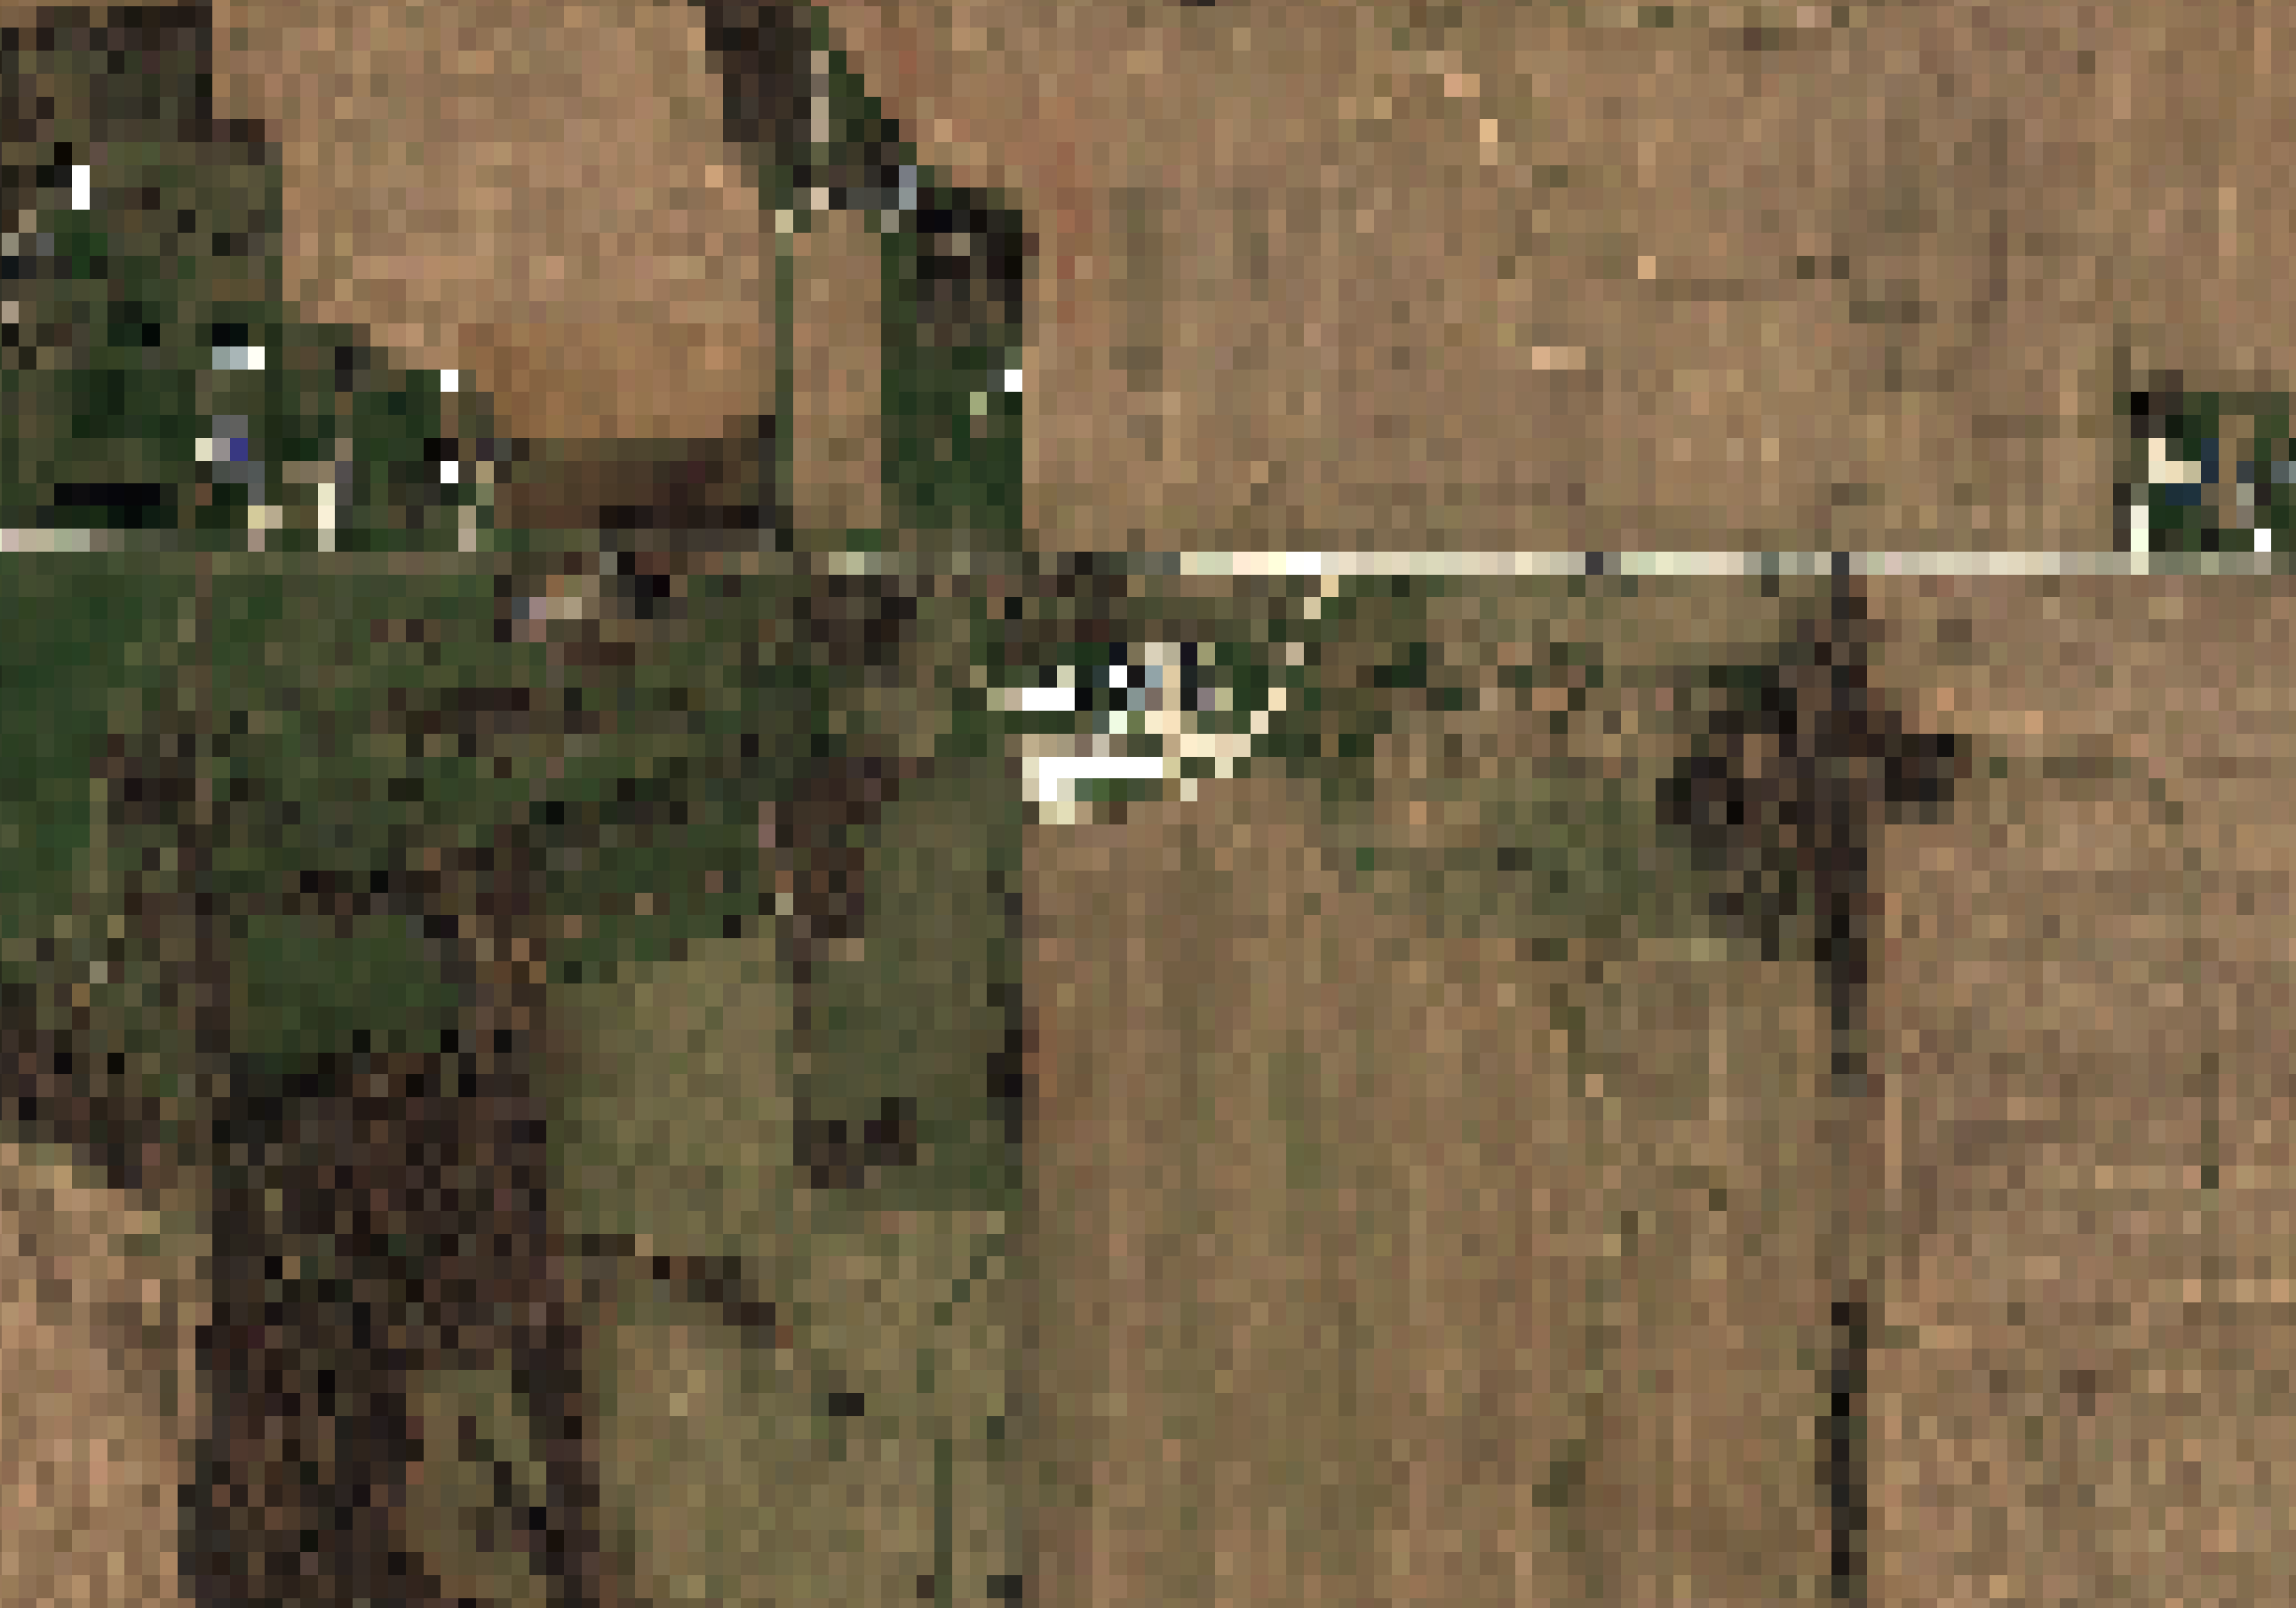 low resolution from commercial satellite imagery providers